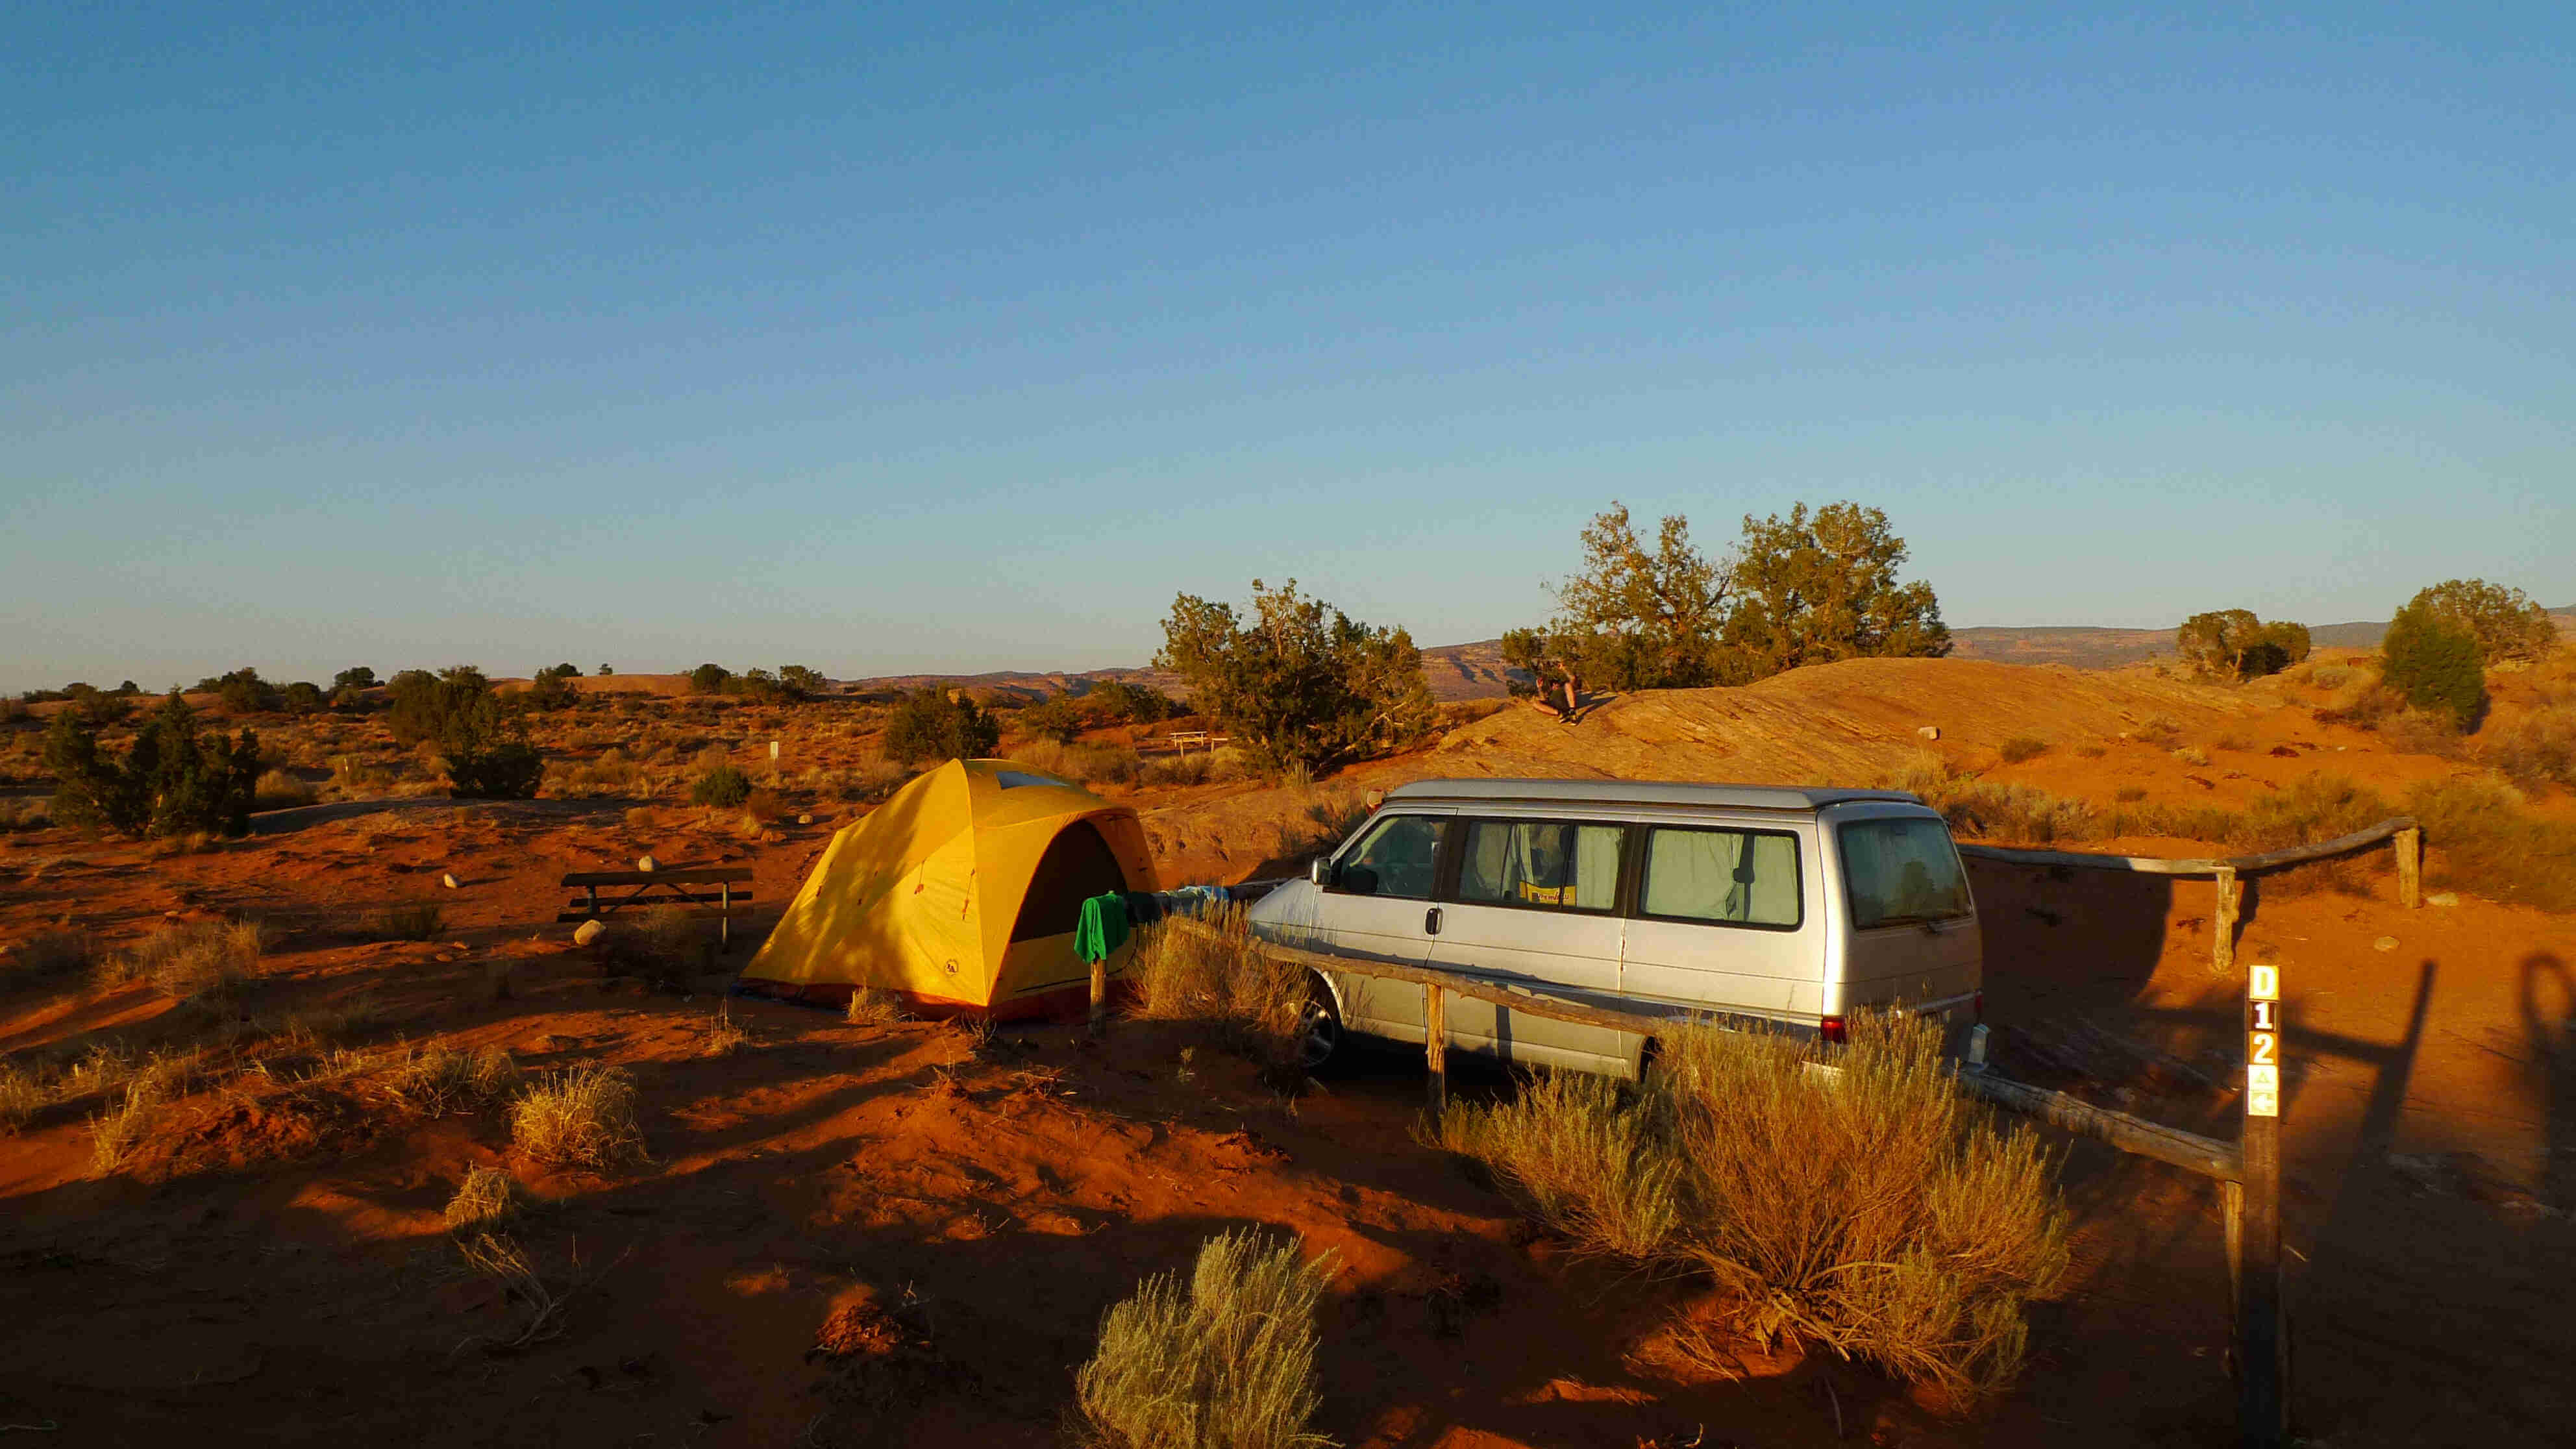 Left side view of a silver van, with a yellow tent set up near the front bumper, in a brushy desert field